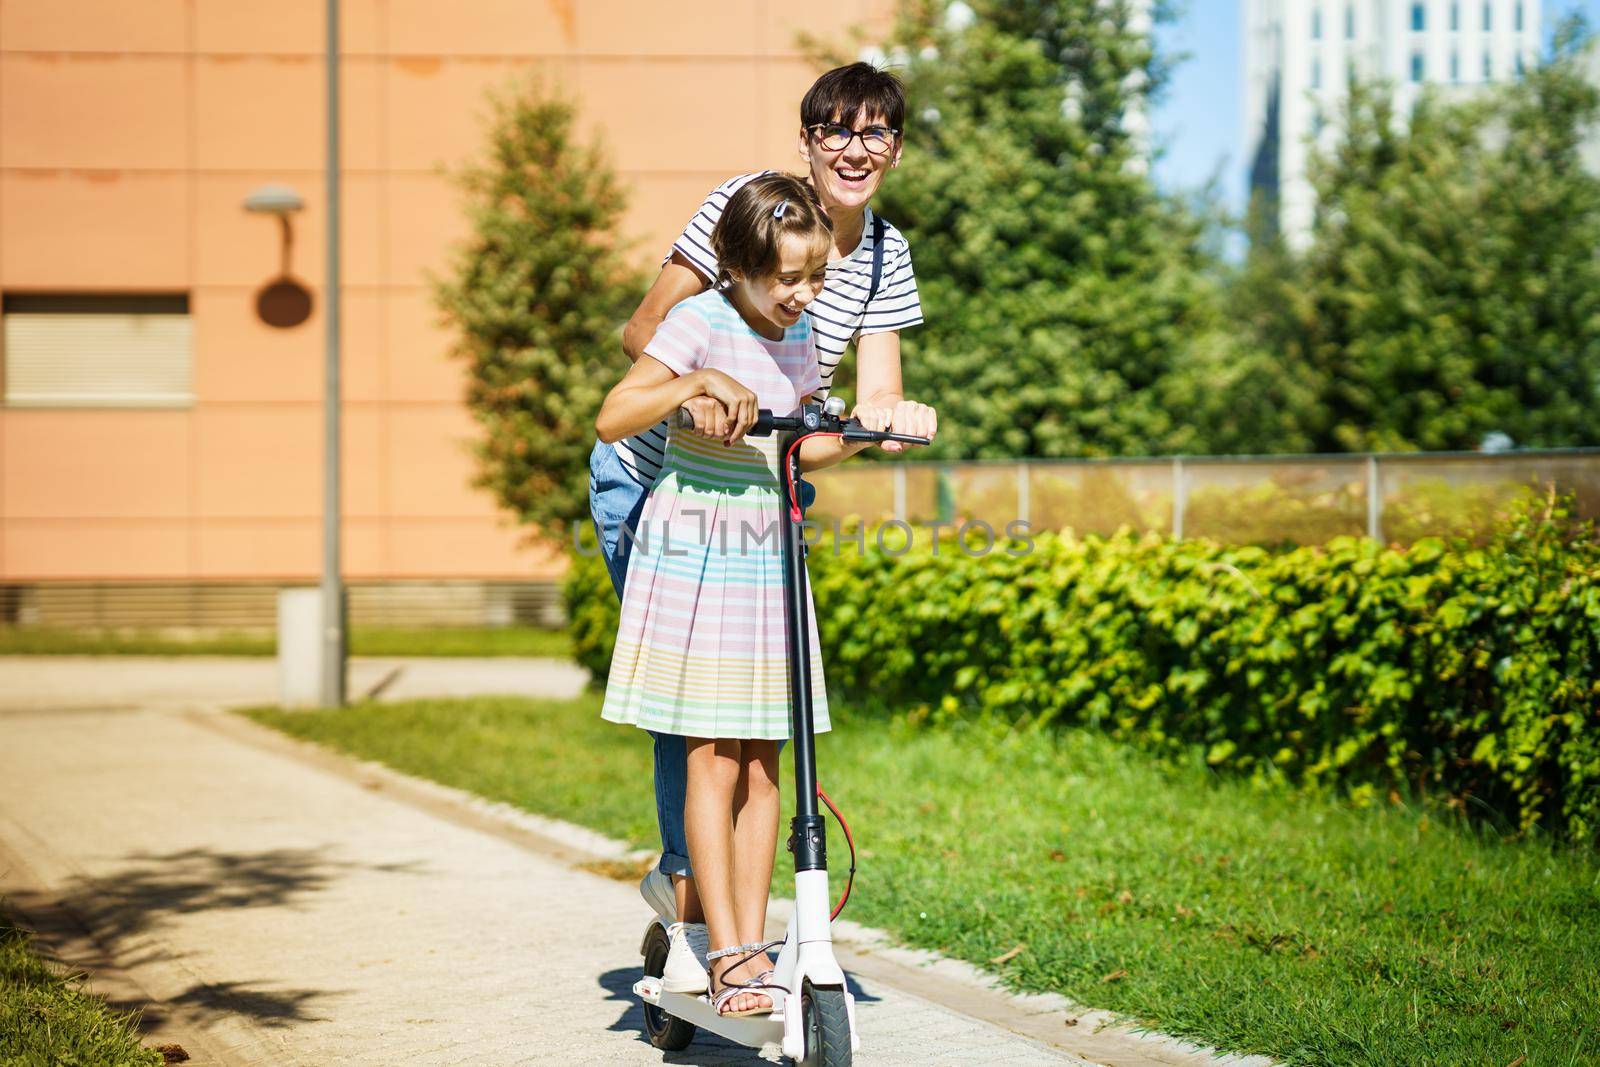 Mother and daughter riding on electric scooter in the city street.